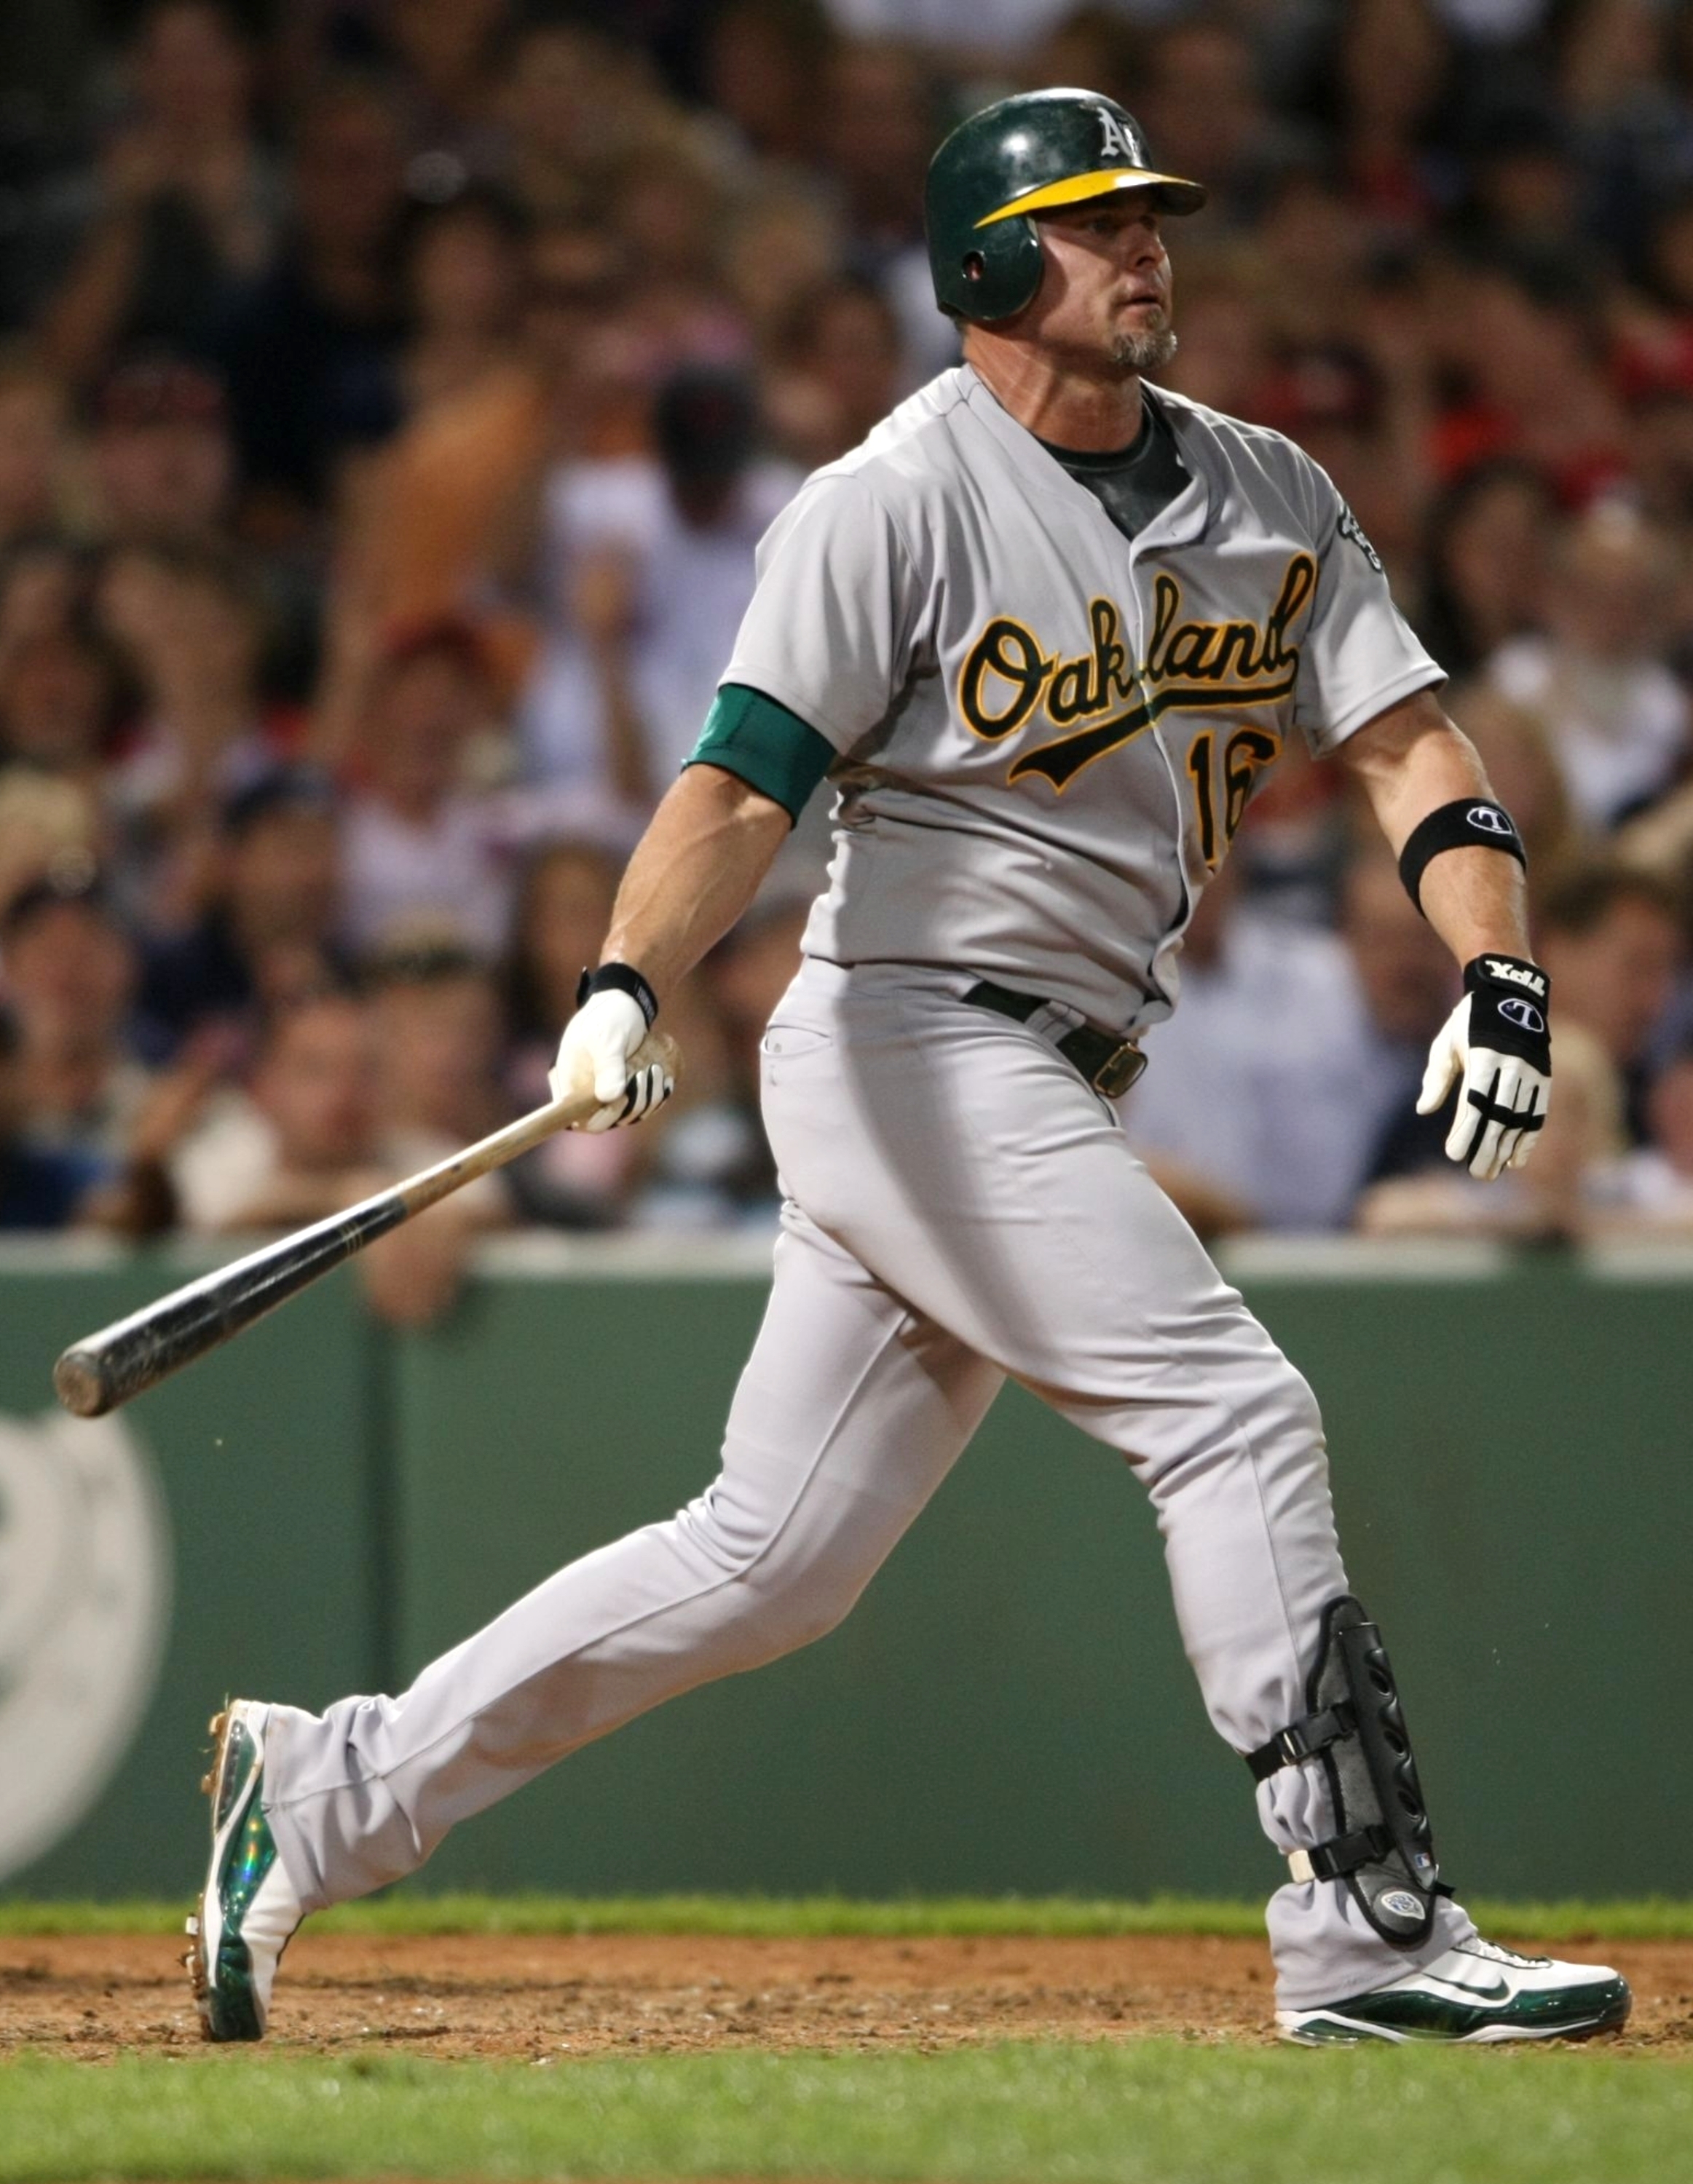 BOSTON - JULY 6:   Jason Giambi #16 of the Oakland Athletics strikes out against the Boston Red Sox at Fenway Park on July 6, 2009 in Boston, Massachusetts. (Photo by Elsa/Getty Images)